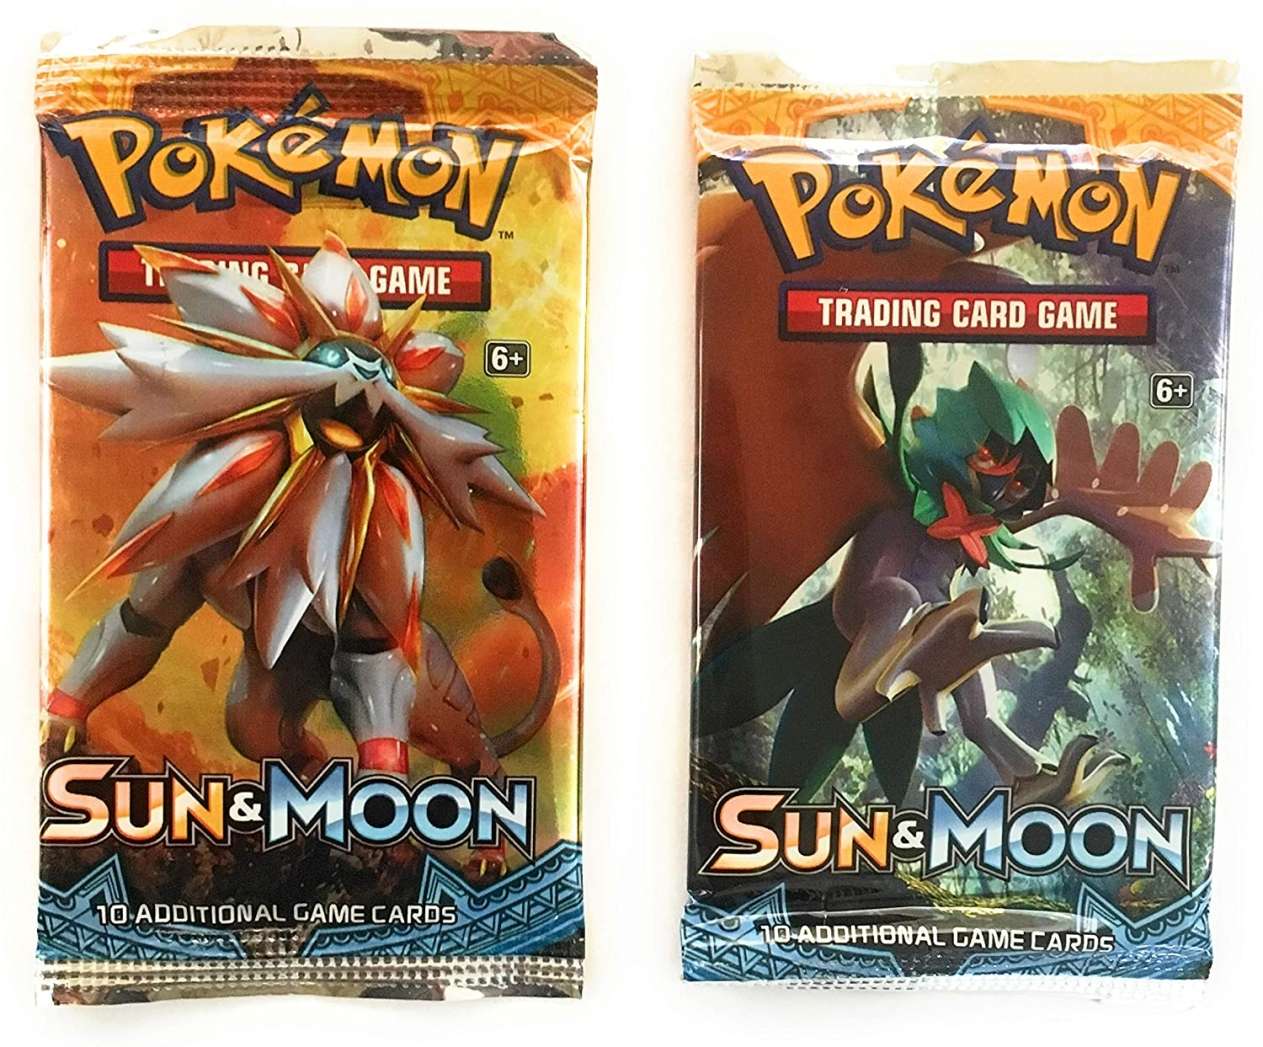 do nft trading card game,pokemon card game p2e game nft game